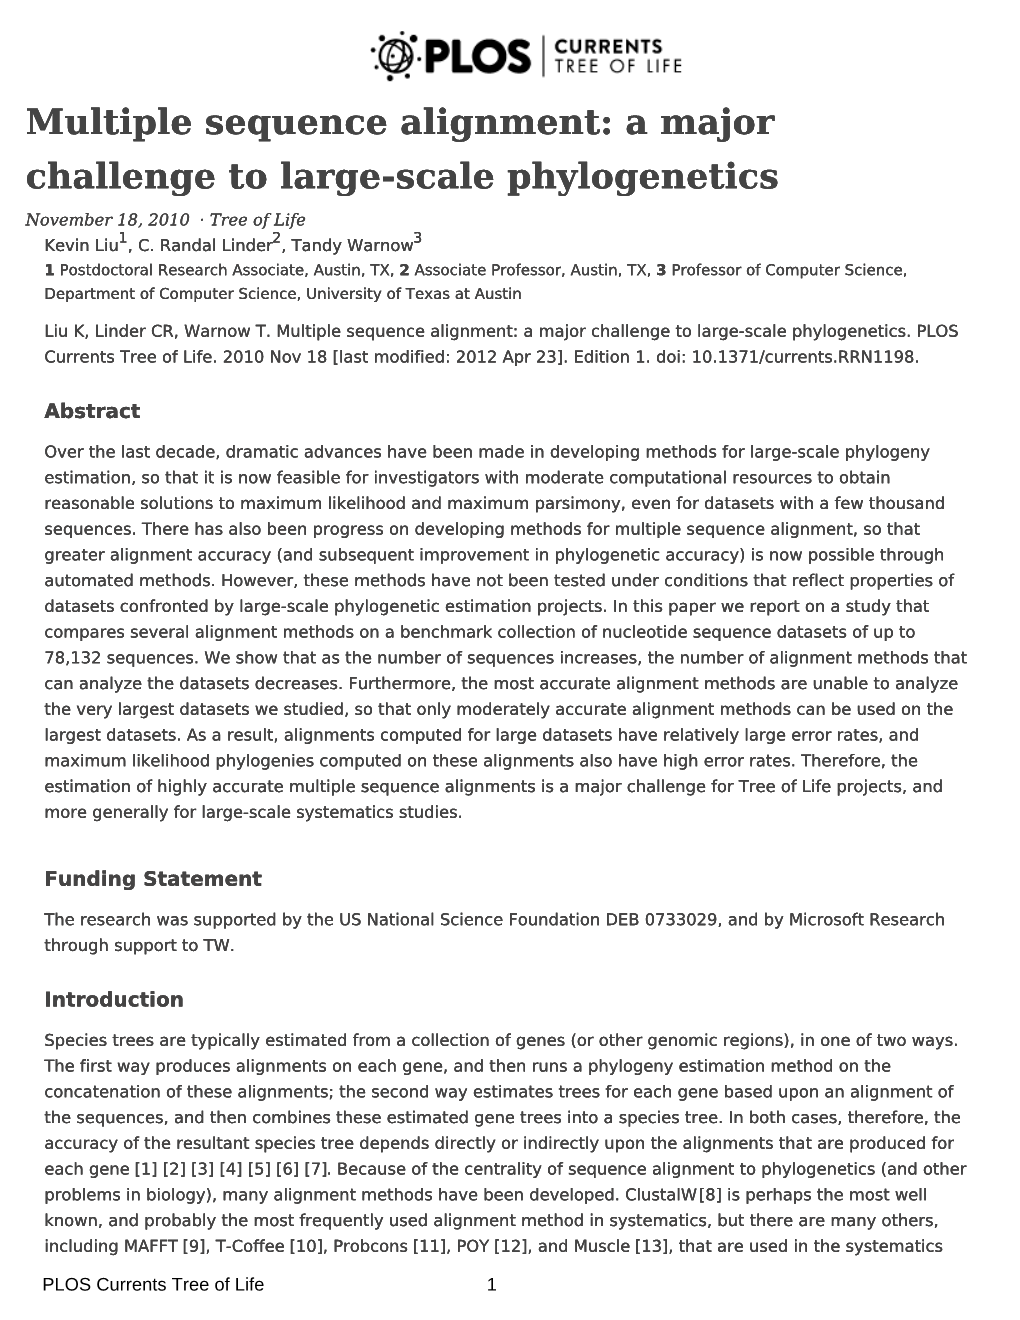 Multiple Sequence Alignment: a Major Challenge to Large-Scale Phylogenetics